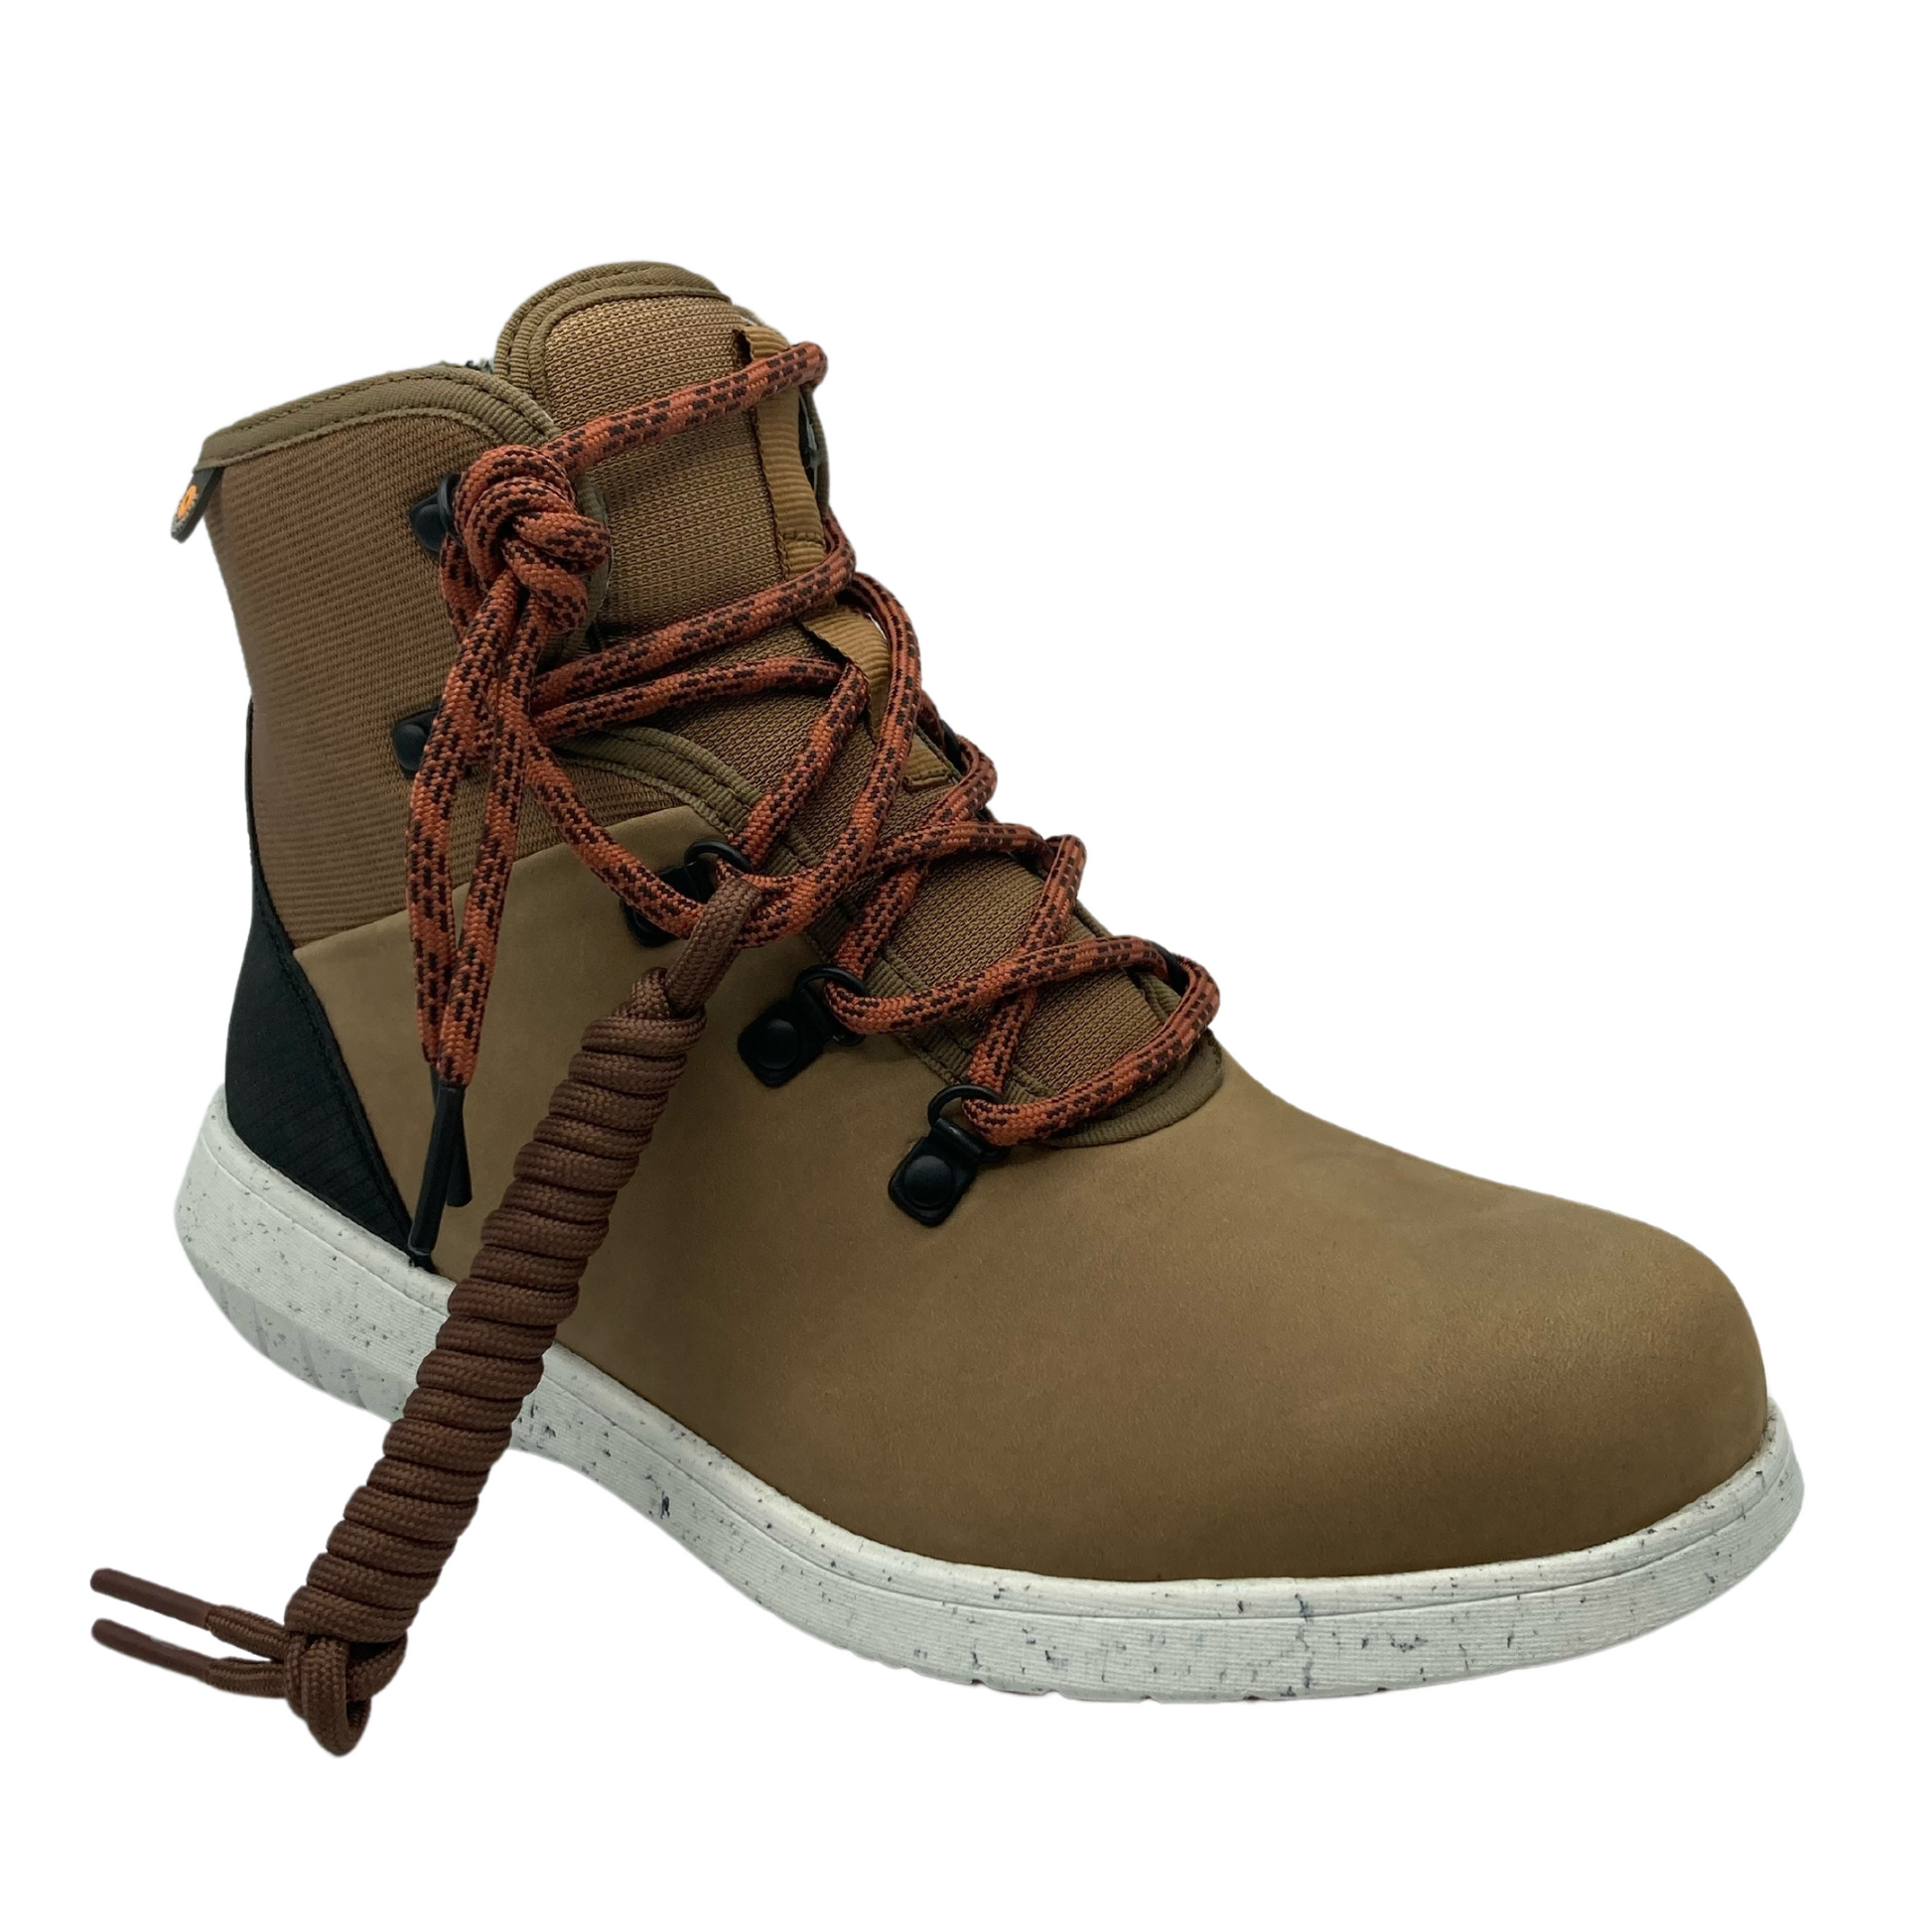 45 degree angled view of light brown hiking boot with burnt orange laces and white outsole